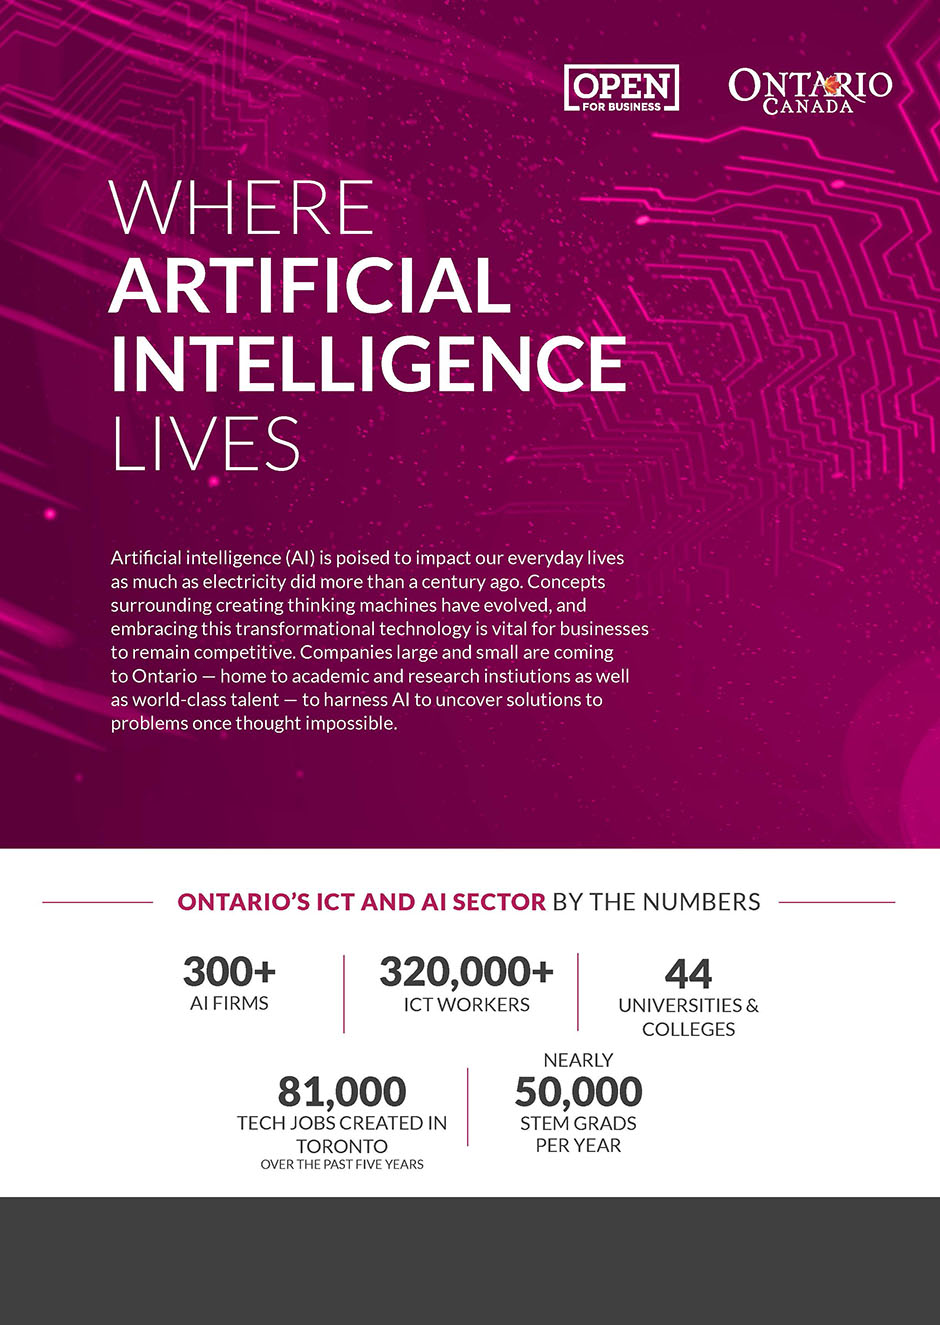 Where artificial intelligence lives